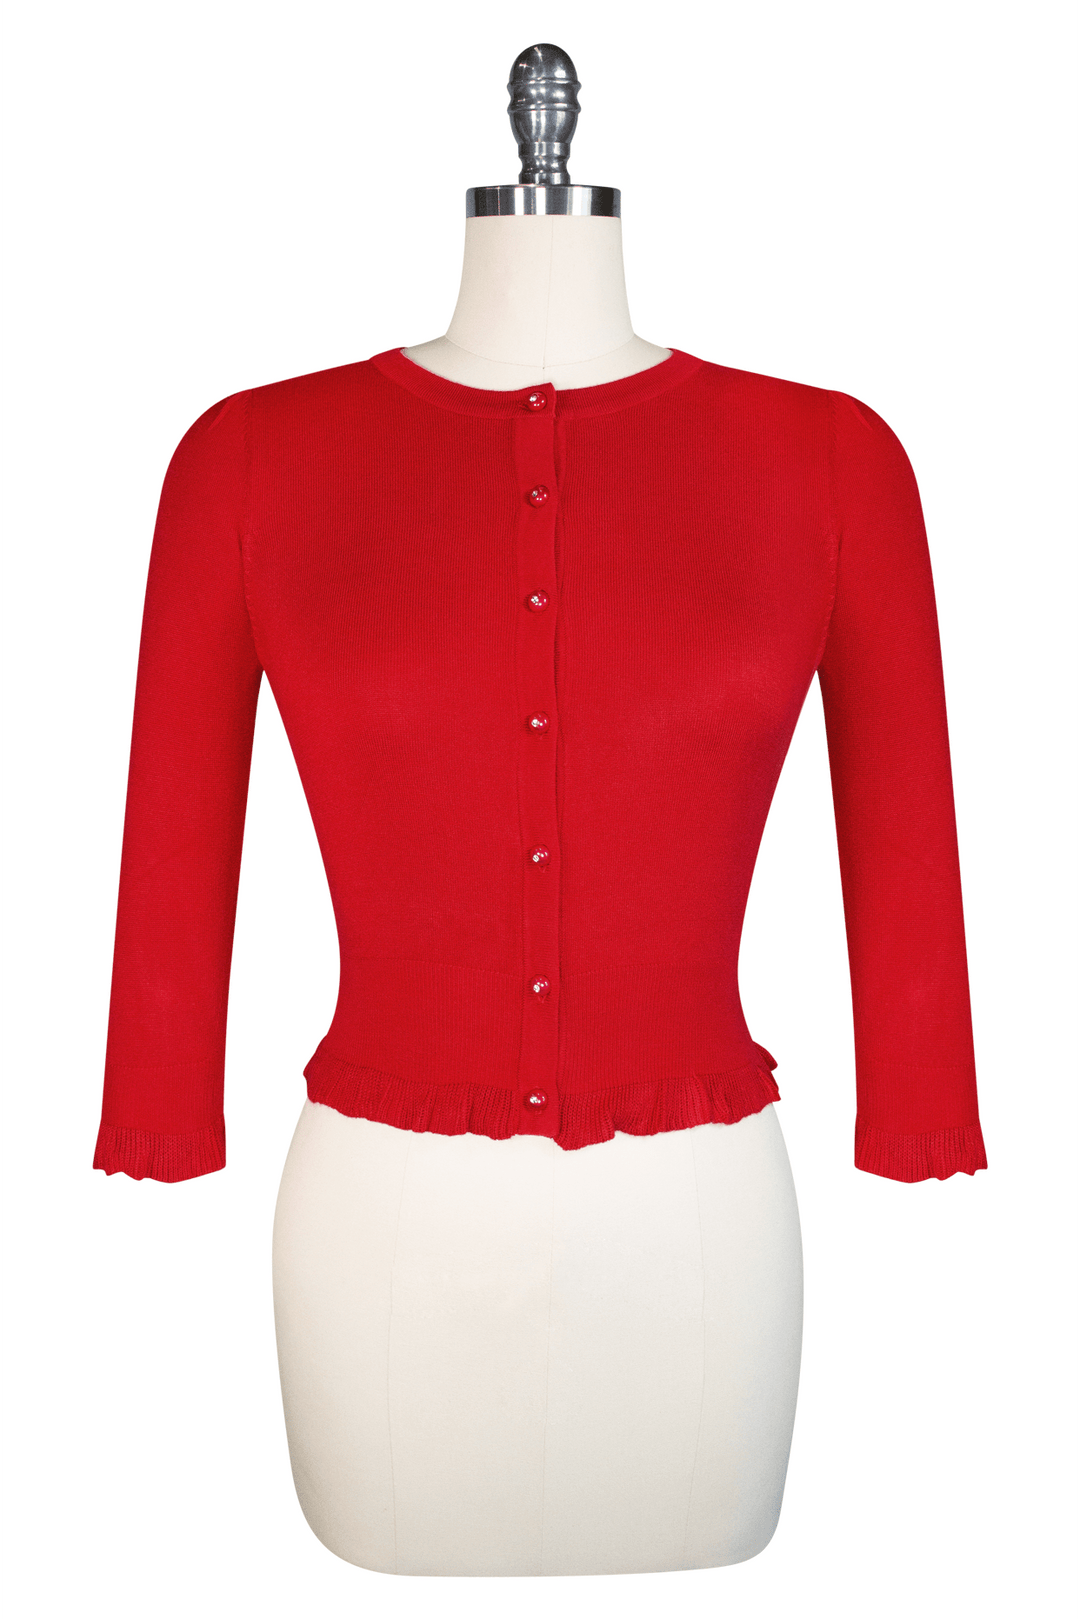 D'Amour 3/4 Sleeve Cardigan (Red) - Kitten D'Amour